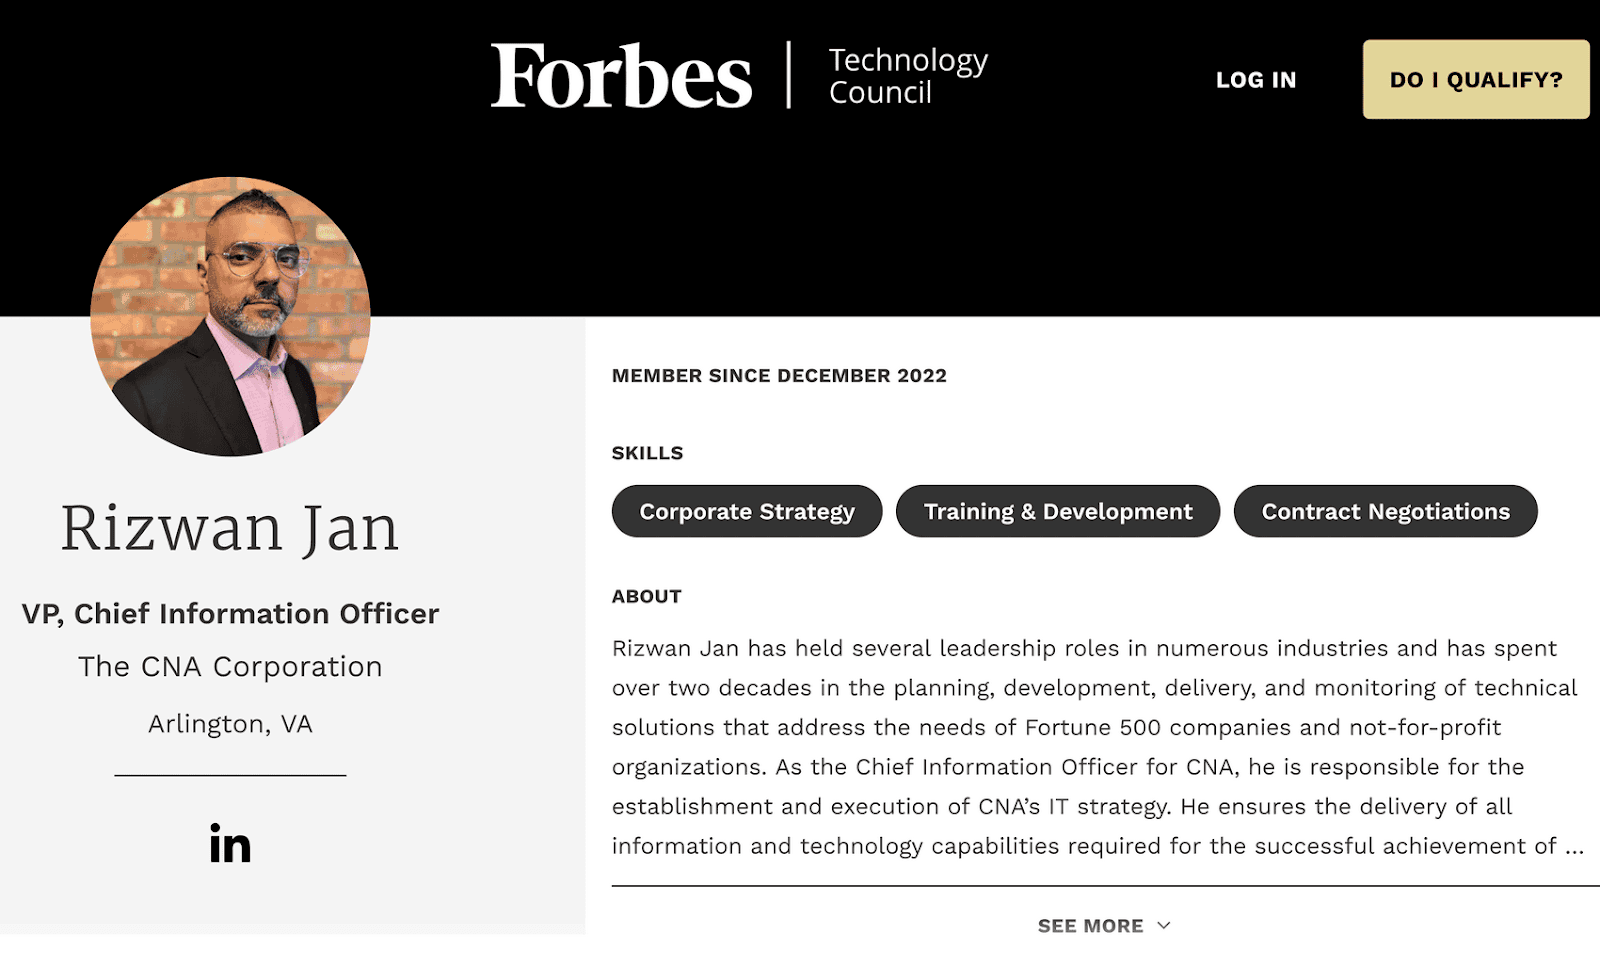 A Forbes Council author page featuring an expert's headshot, membership details, skills, and bio.